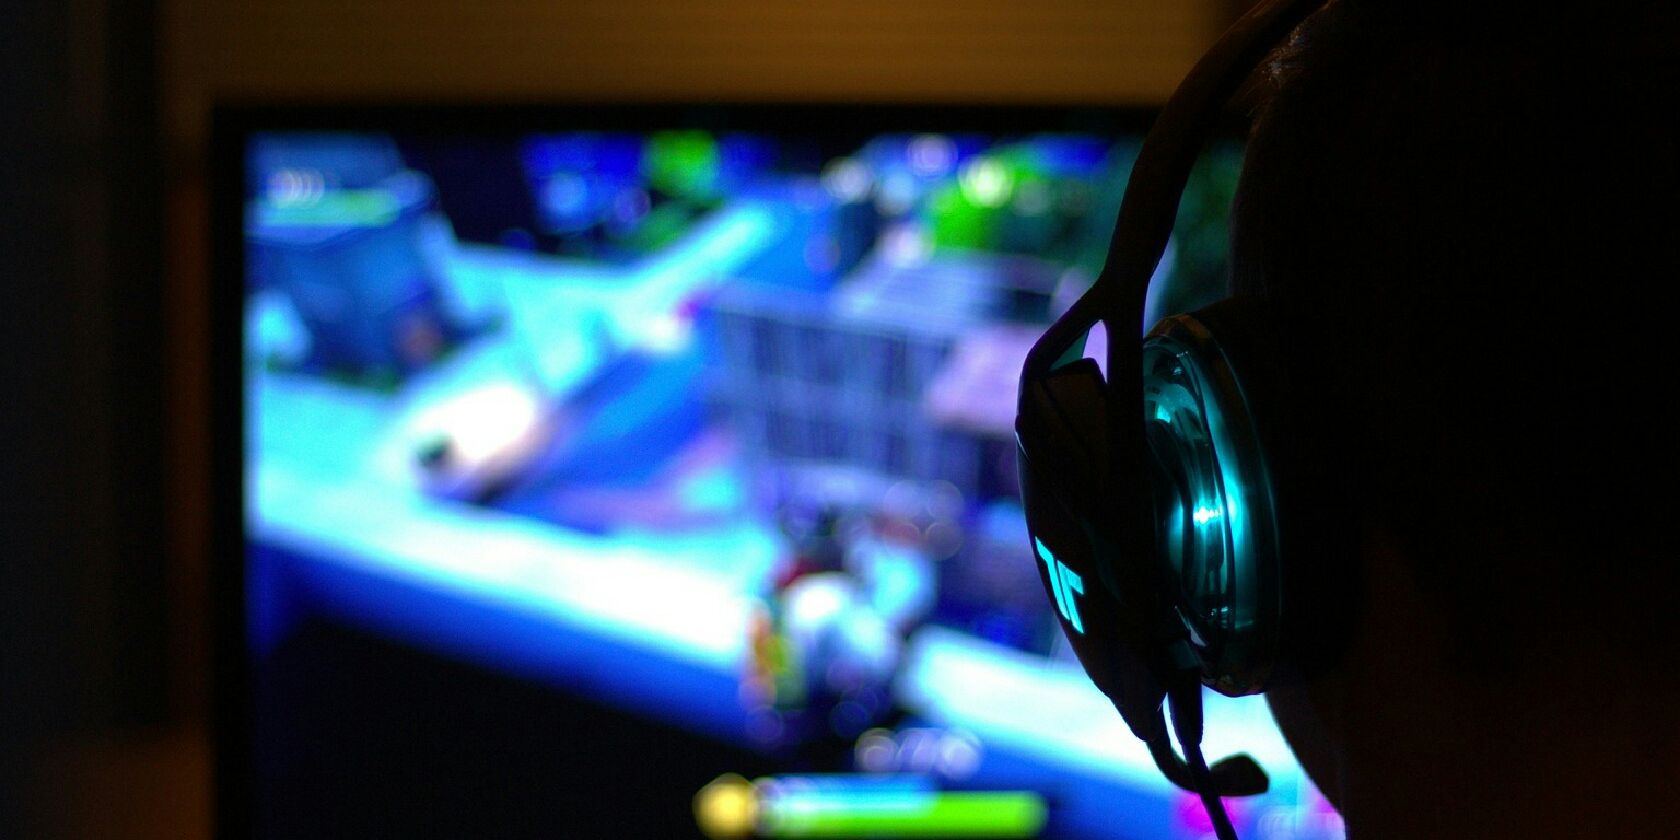 7 Ways to Reduce Lag When Gaming Online - Comwave